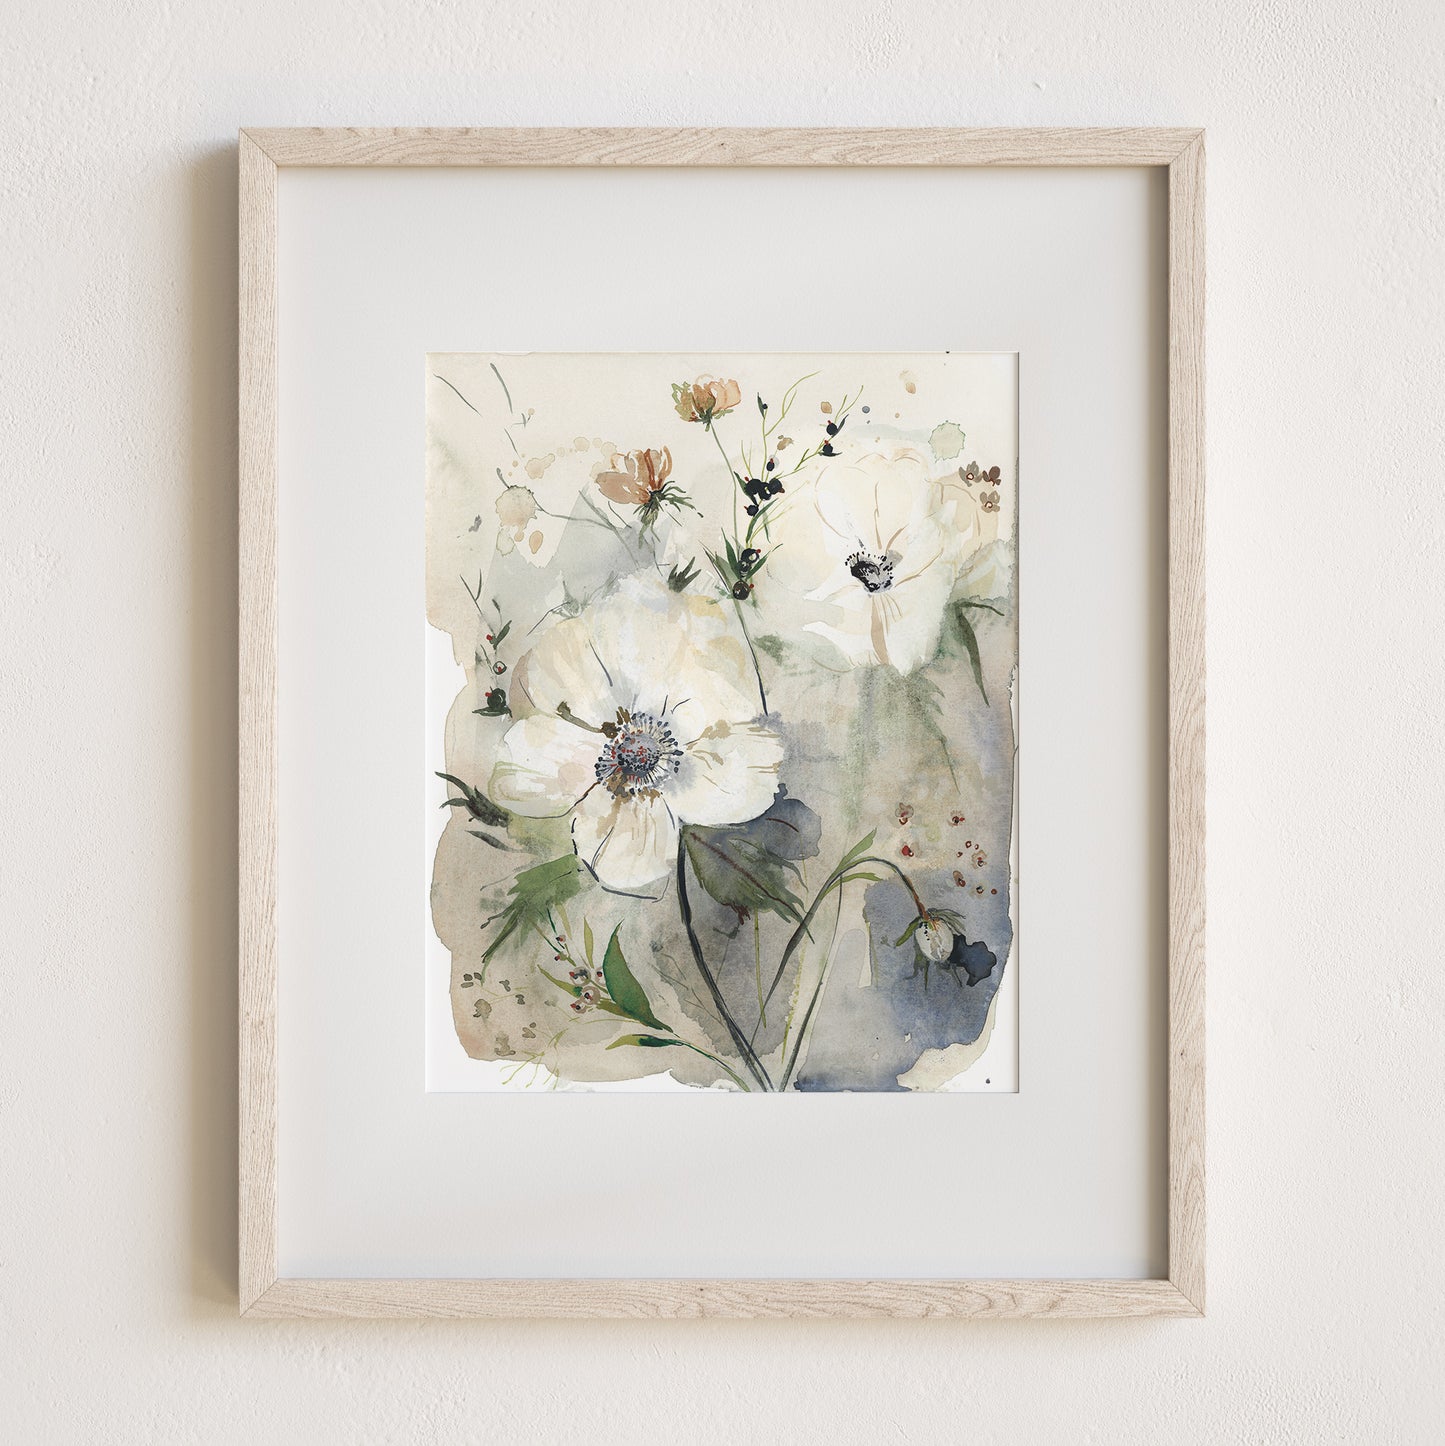 Faded Anemone Art Print, 8x10" with mat and frame